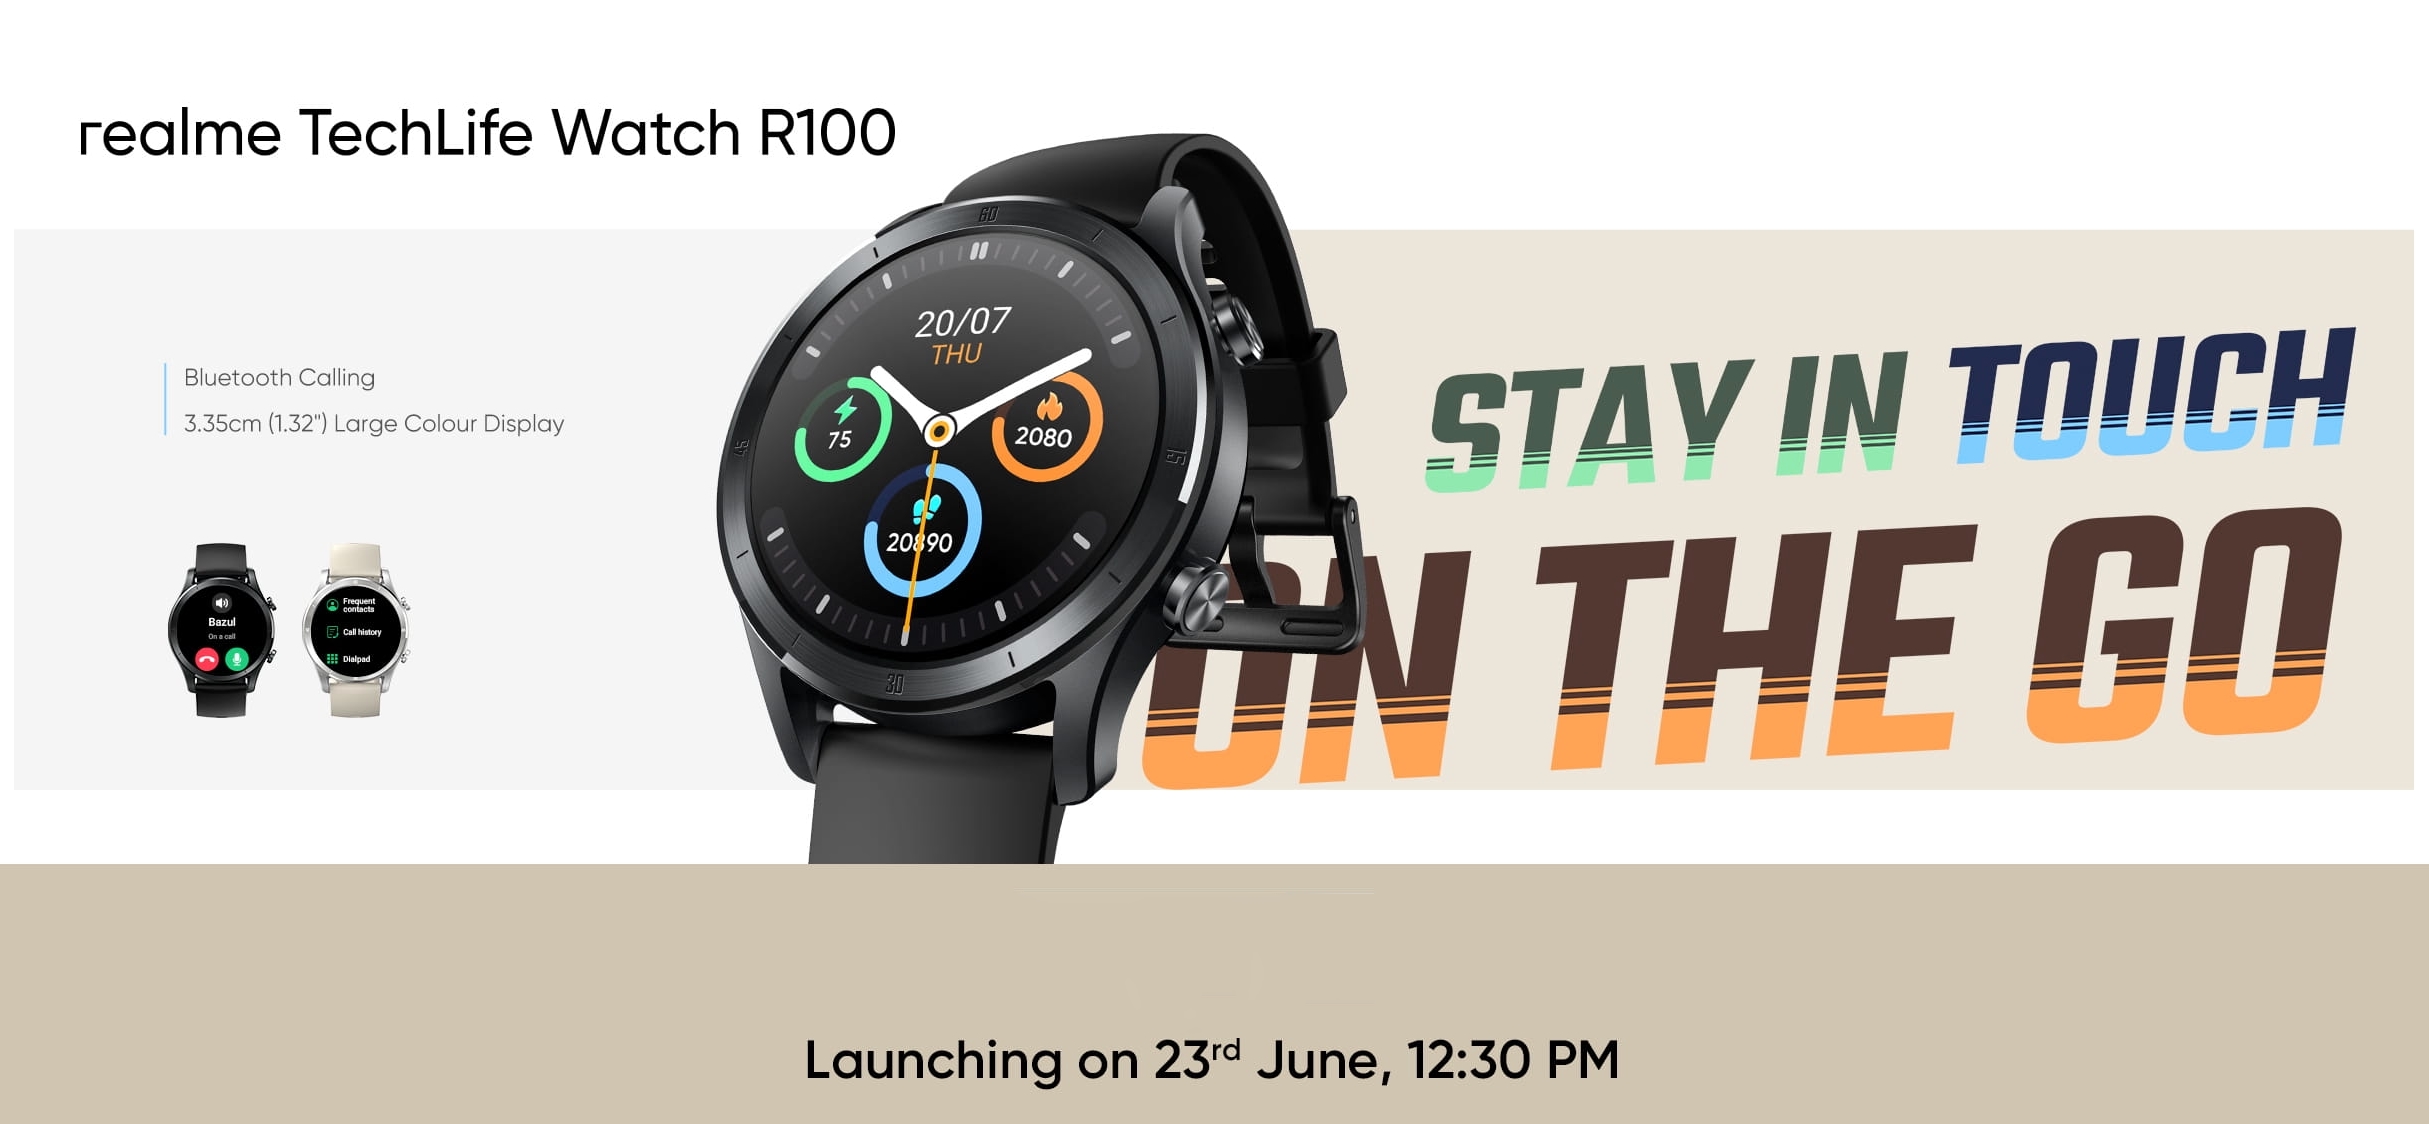 realme techlife watch r100 smart watch with call function and autonomy up to 7 days on june 23